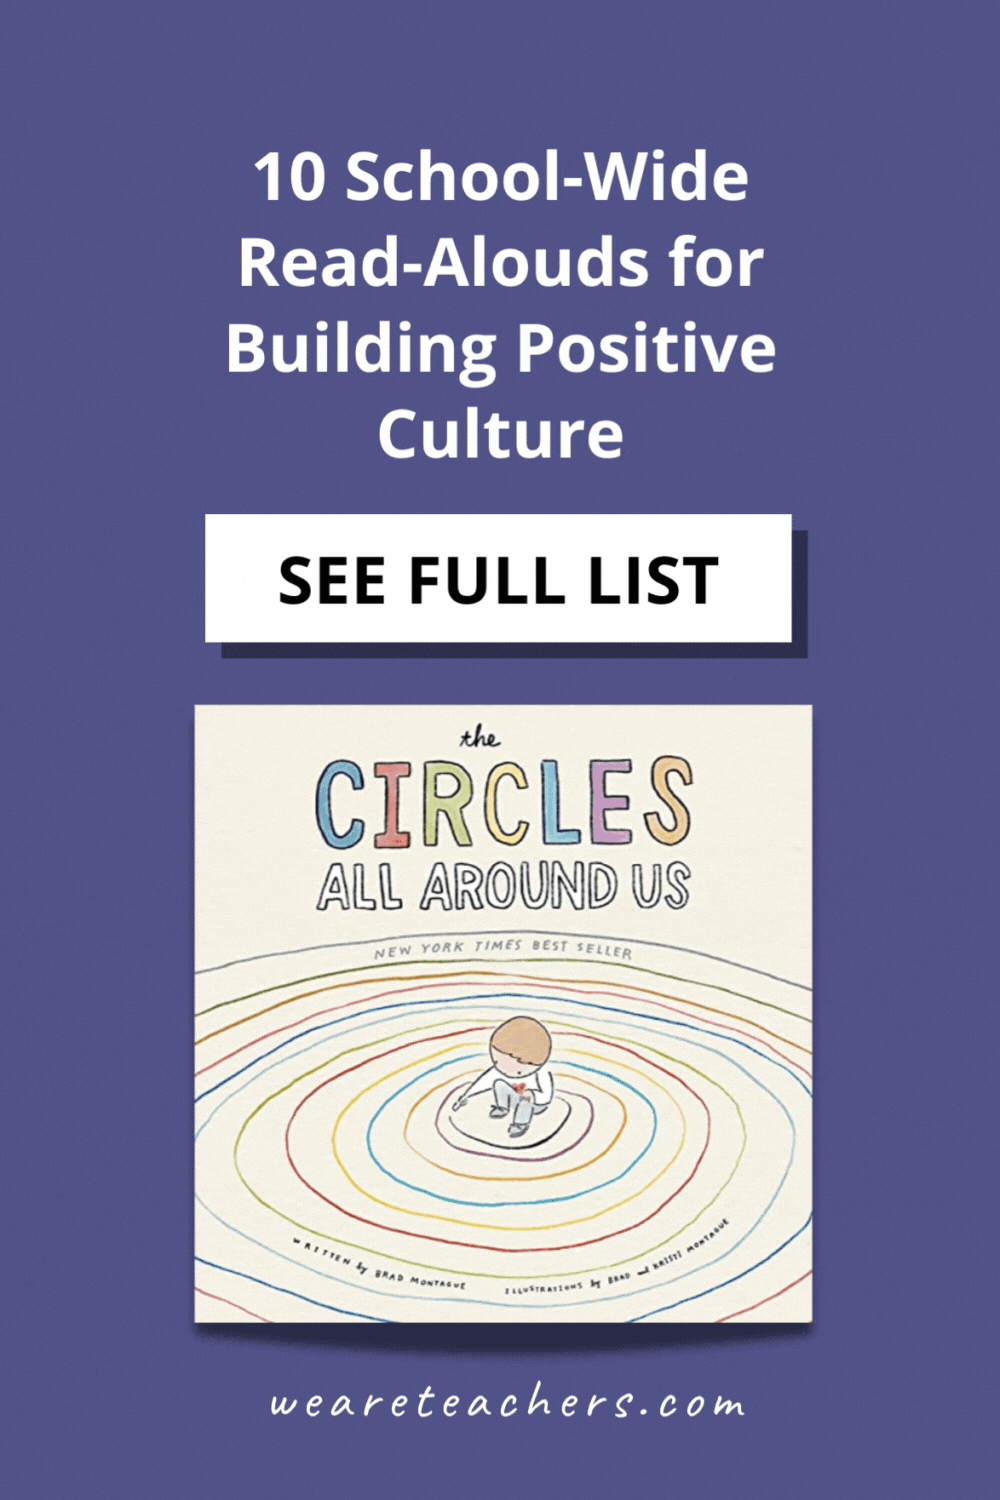 These titles make great read-alouds for building culture whether you read them to students, faculty, or both!